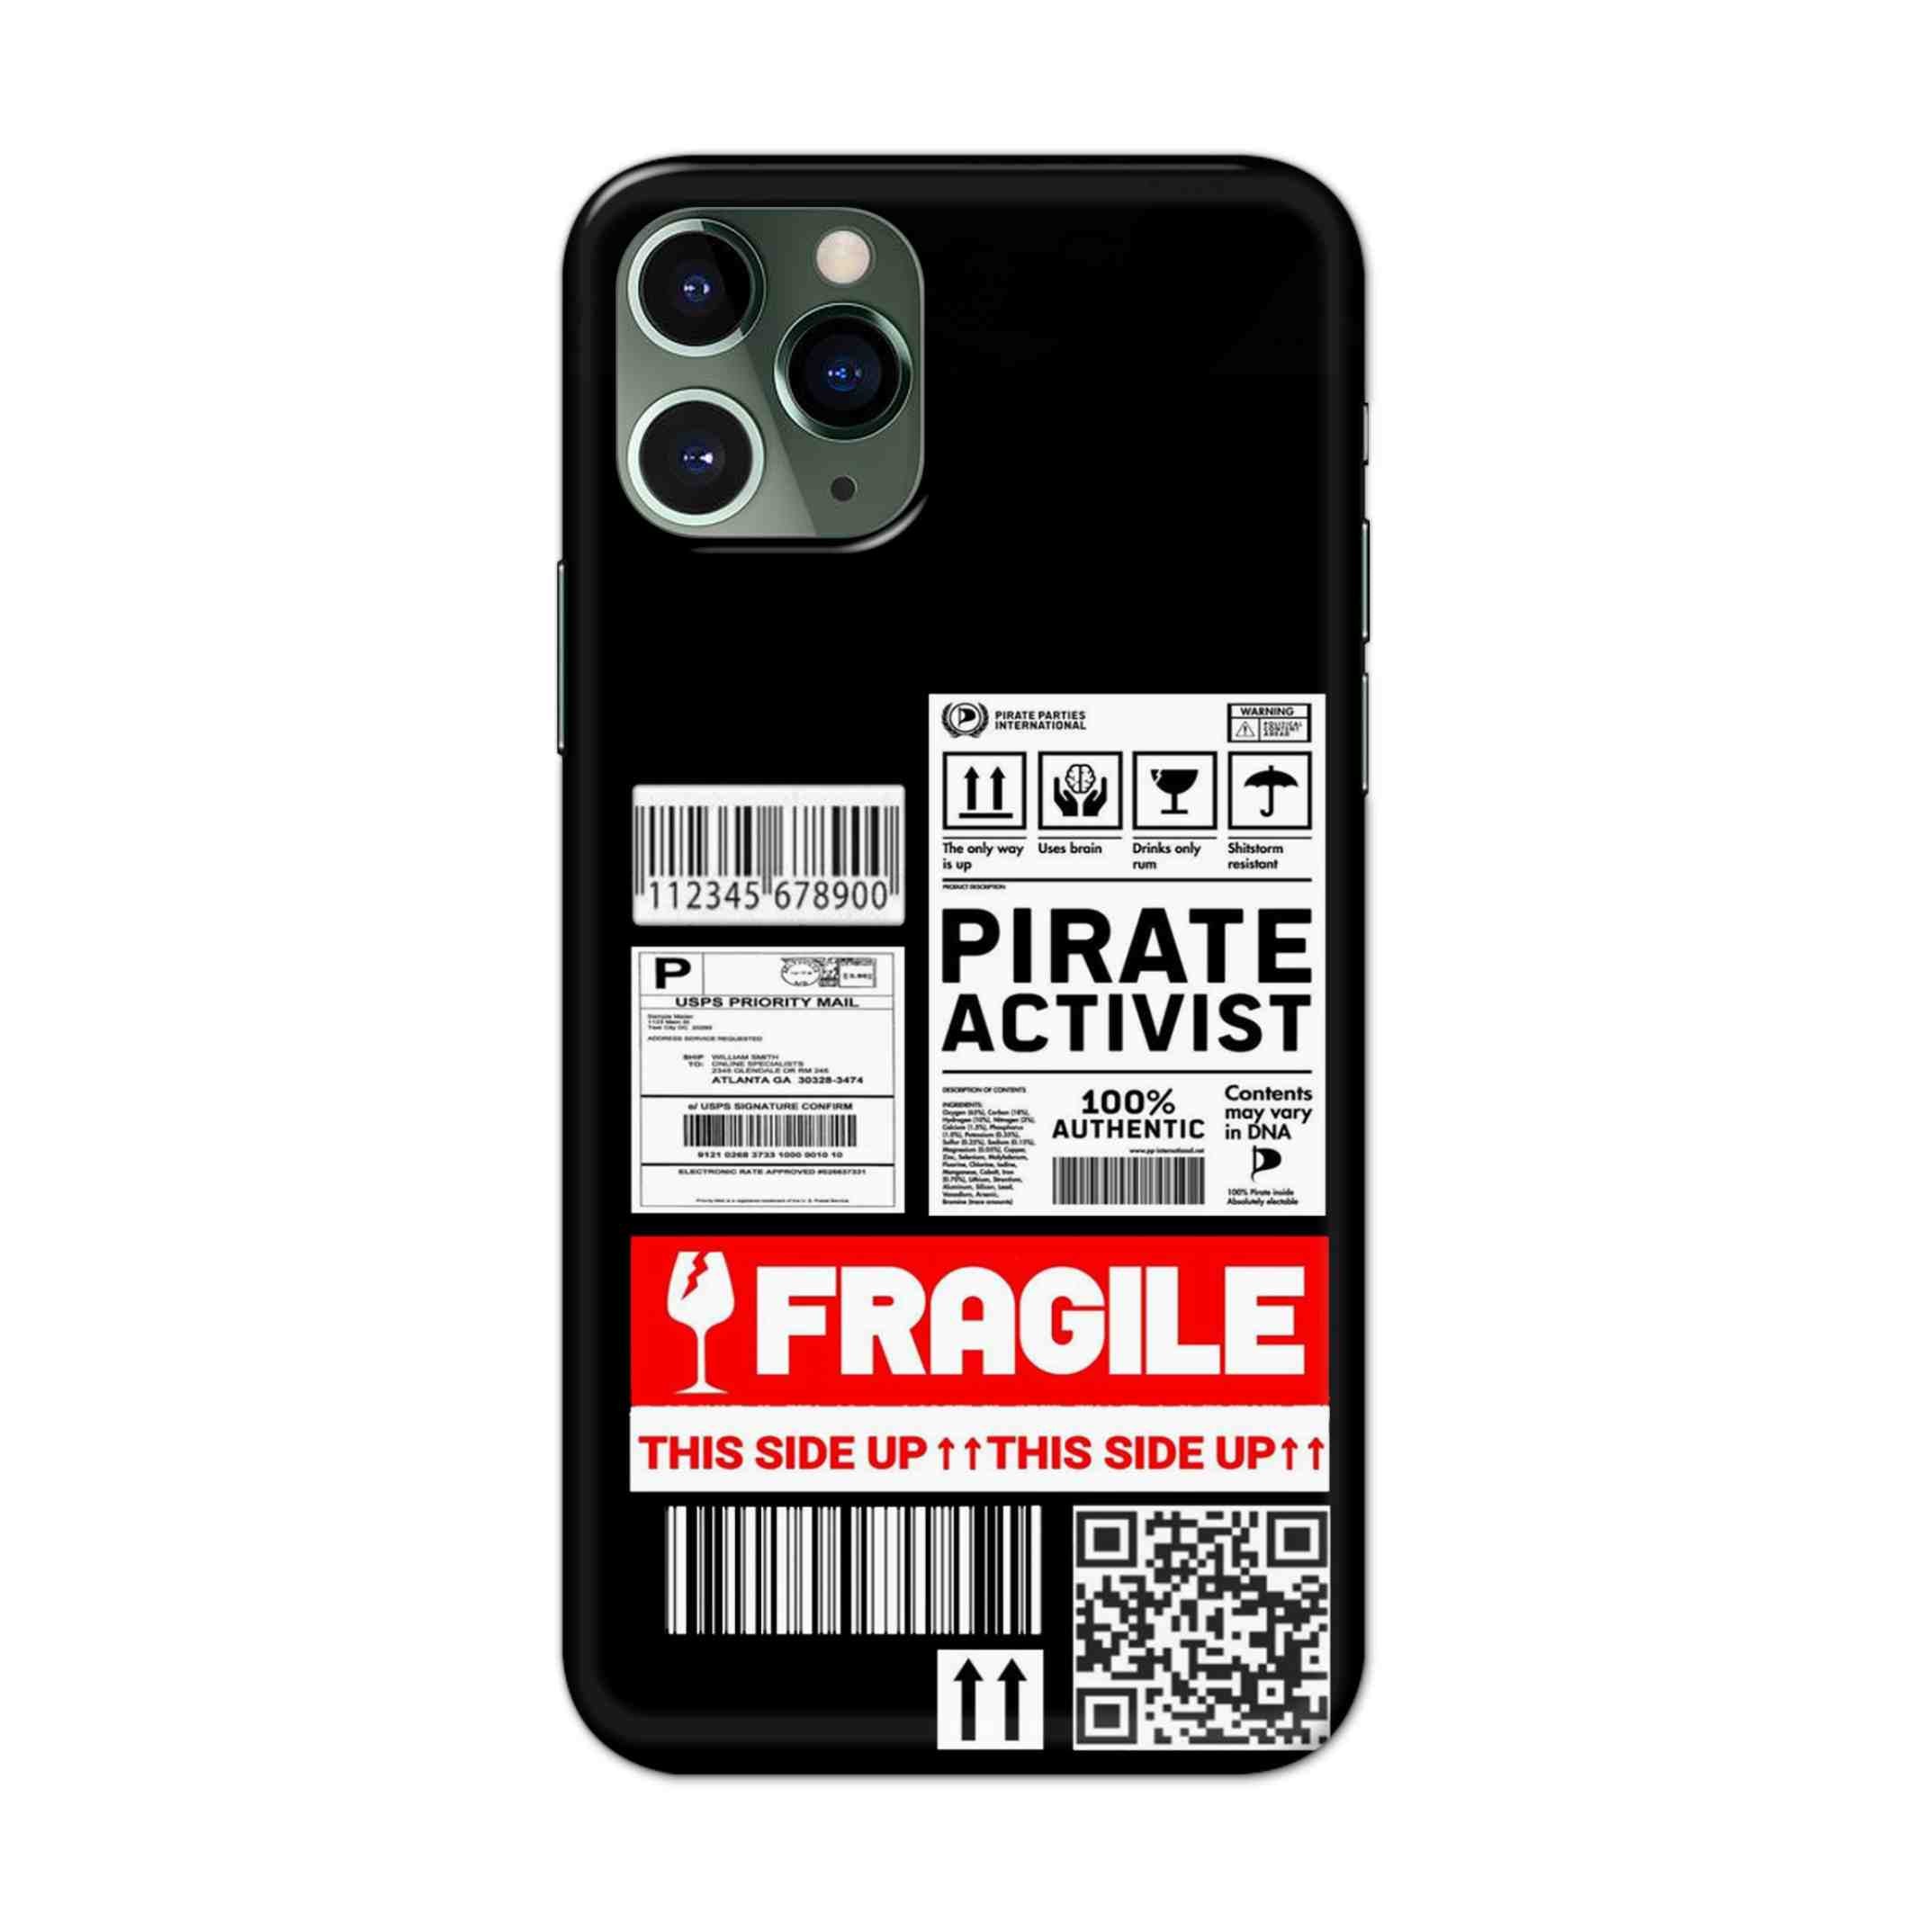 Buy Fragile Hard Back Mobile Phone Case/Cover For iPhone 11 Pro Max Online